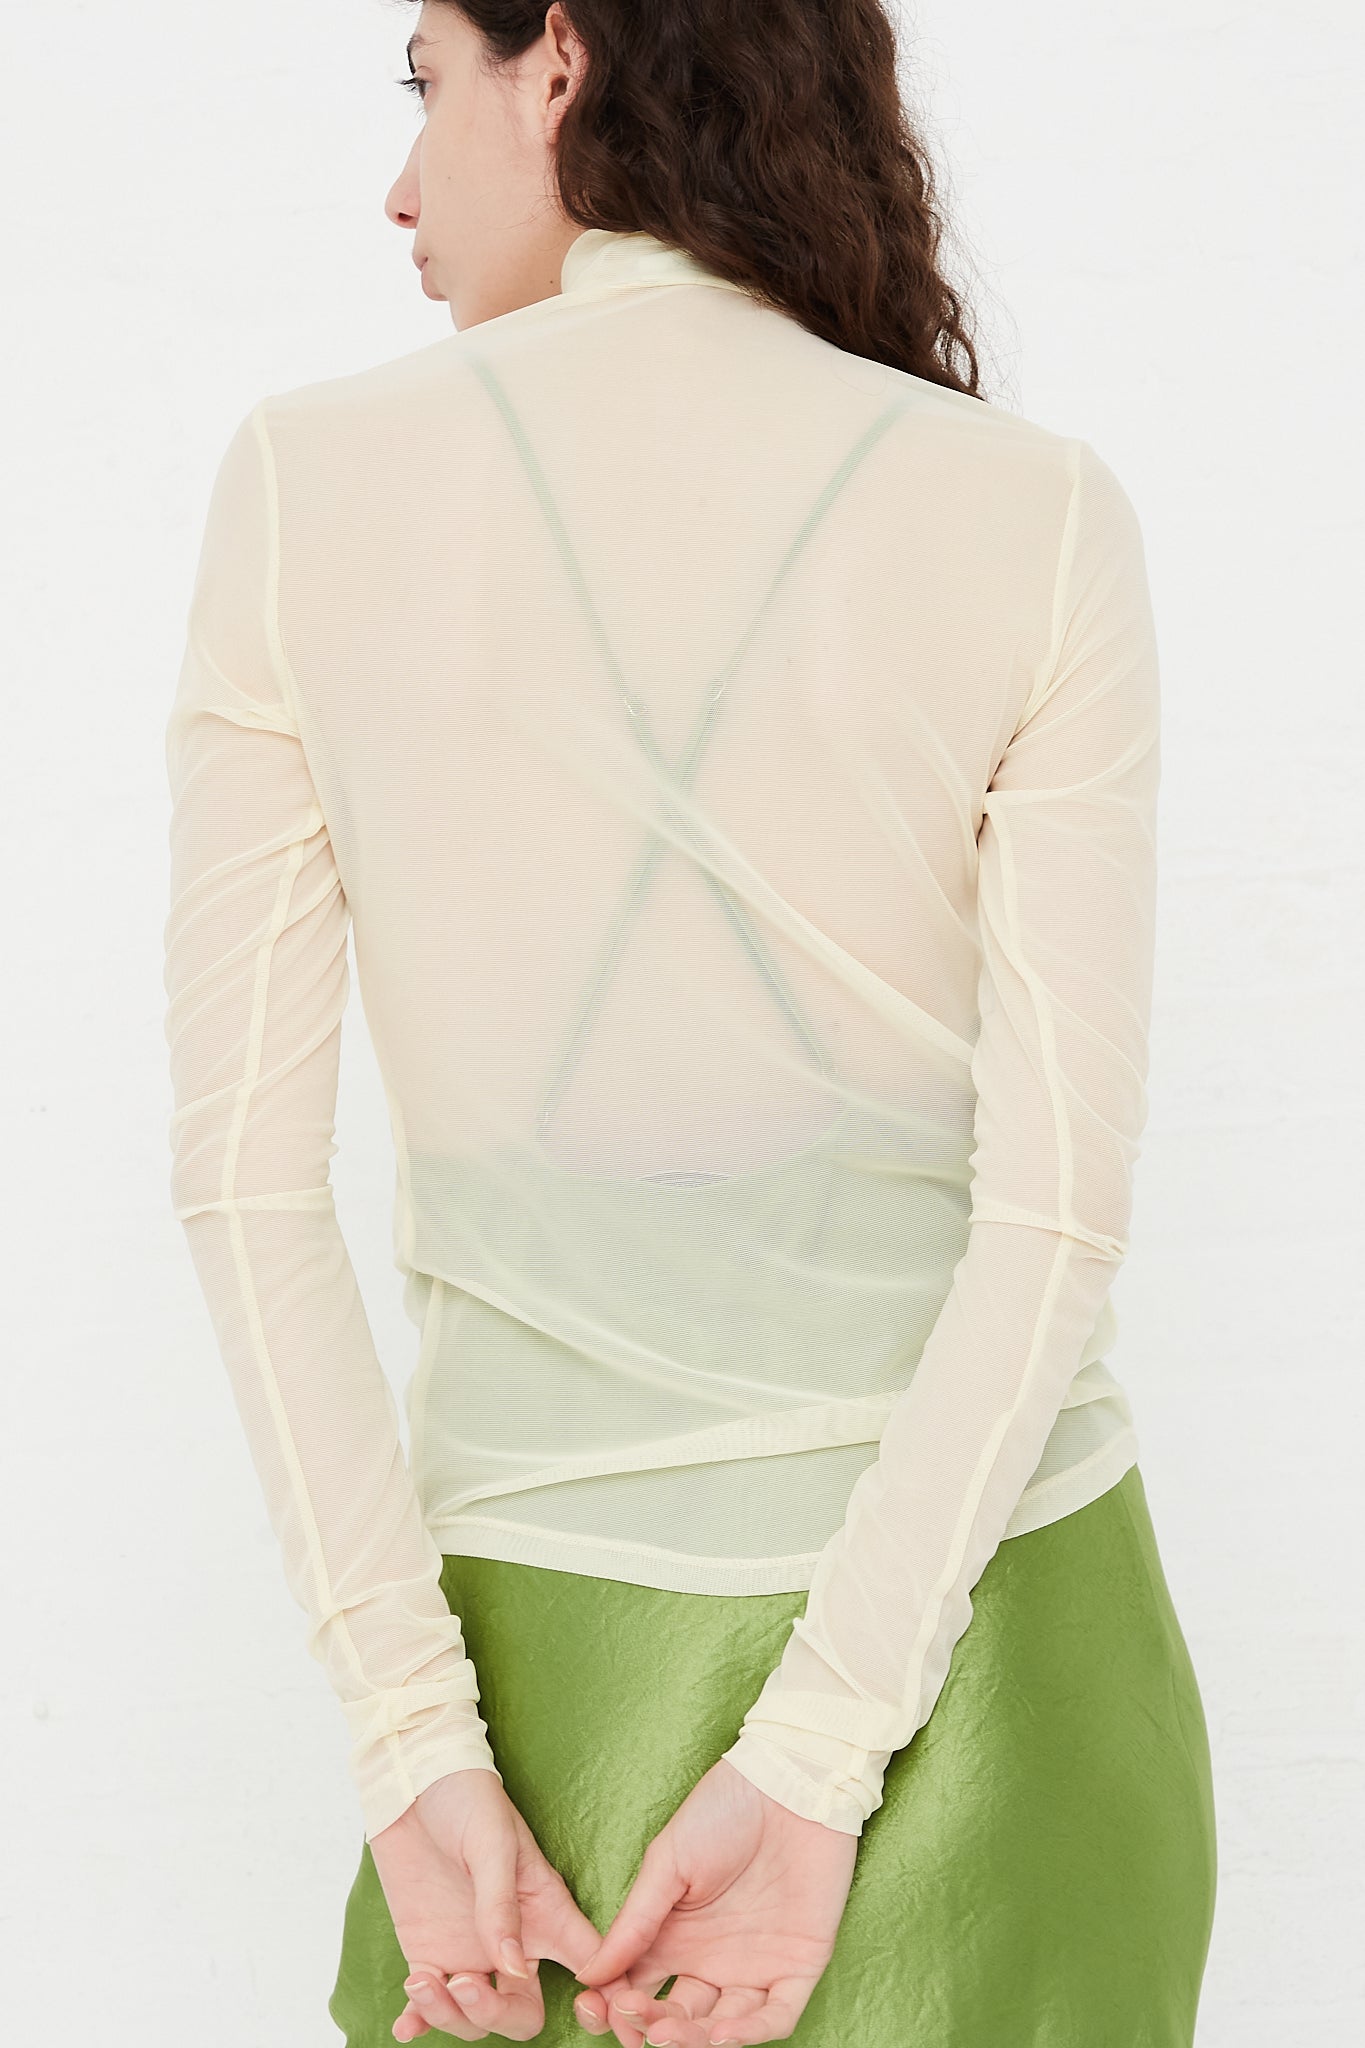 The back view of a model wearing a green skirt, designed by Nomia's Long Sleeve Mesh Mockneck in Ivory.